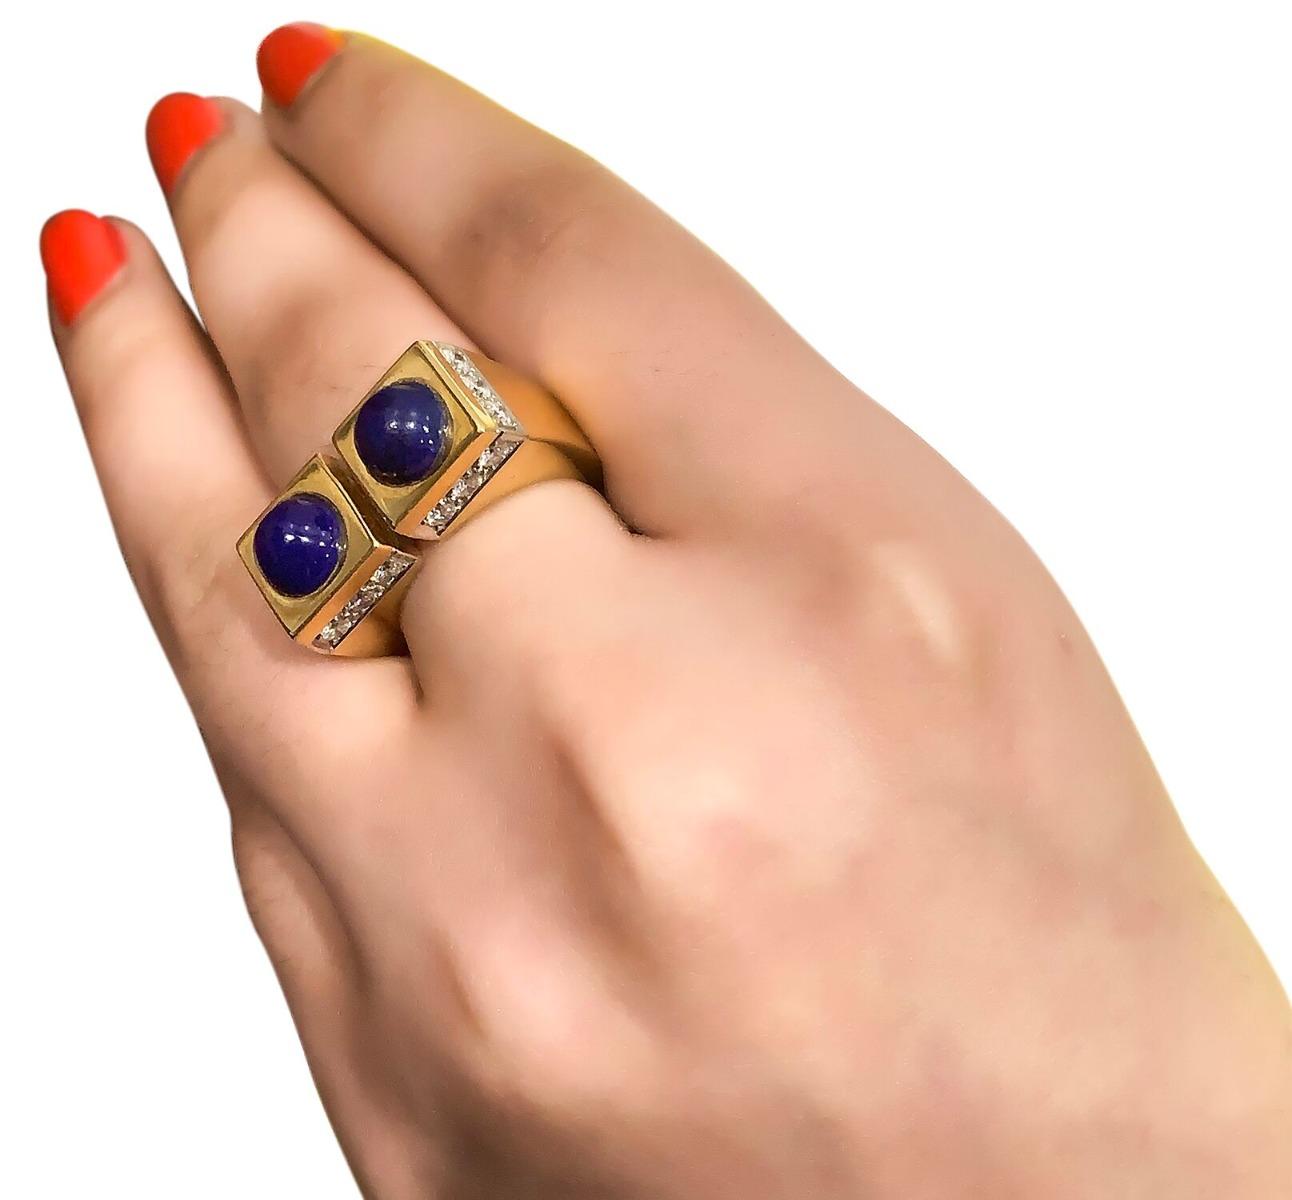 Tiffany & Co Yellow Gold Diamond Lapis Ring Set with 2 Lapis Lazuli Stones In Excellent Condition For Sale In New York, NY